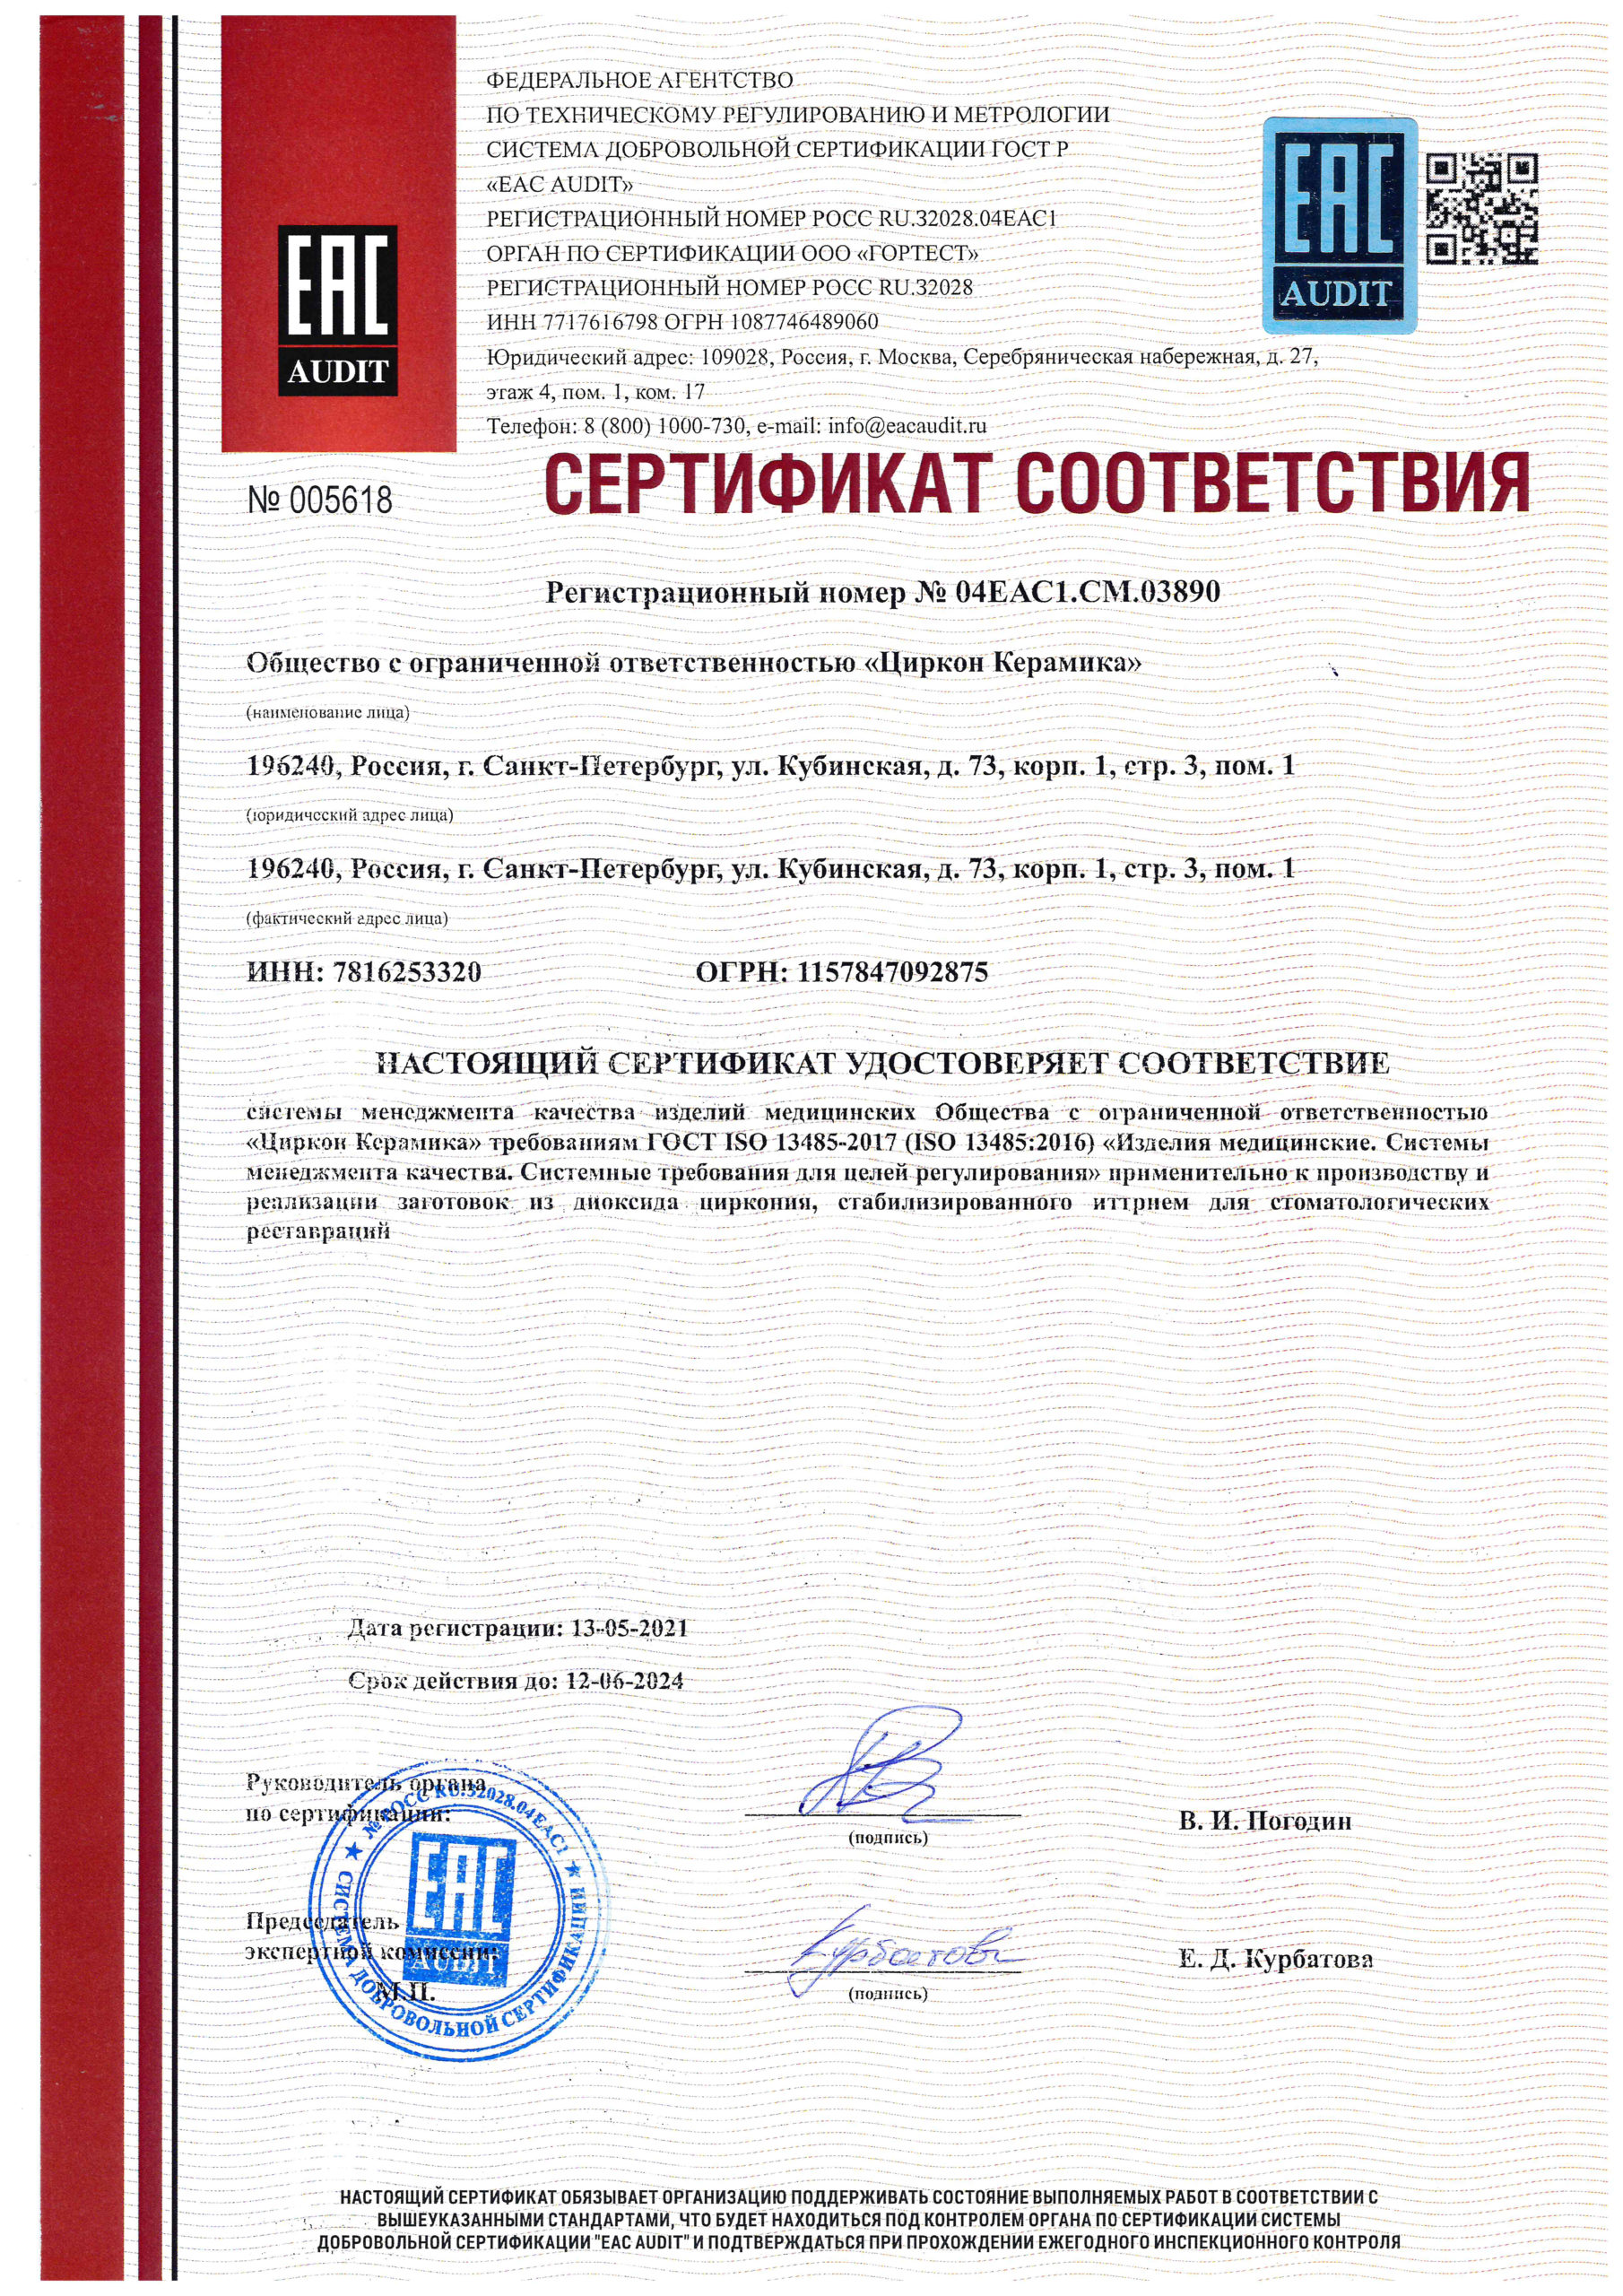 Certificate of Compliance GOST ISO 13485-2017 (ISO 13485: 2016), encs image